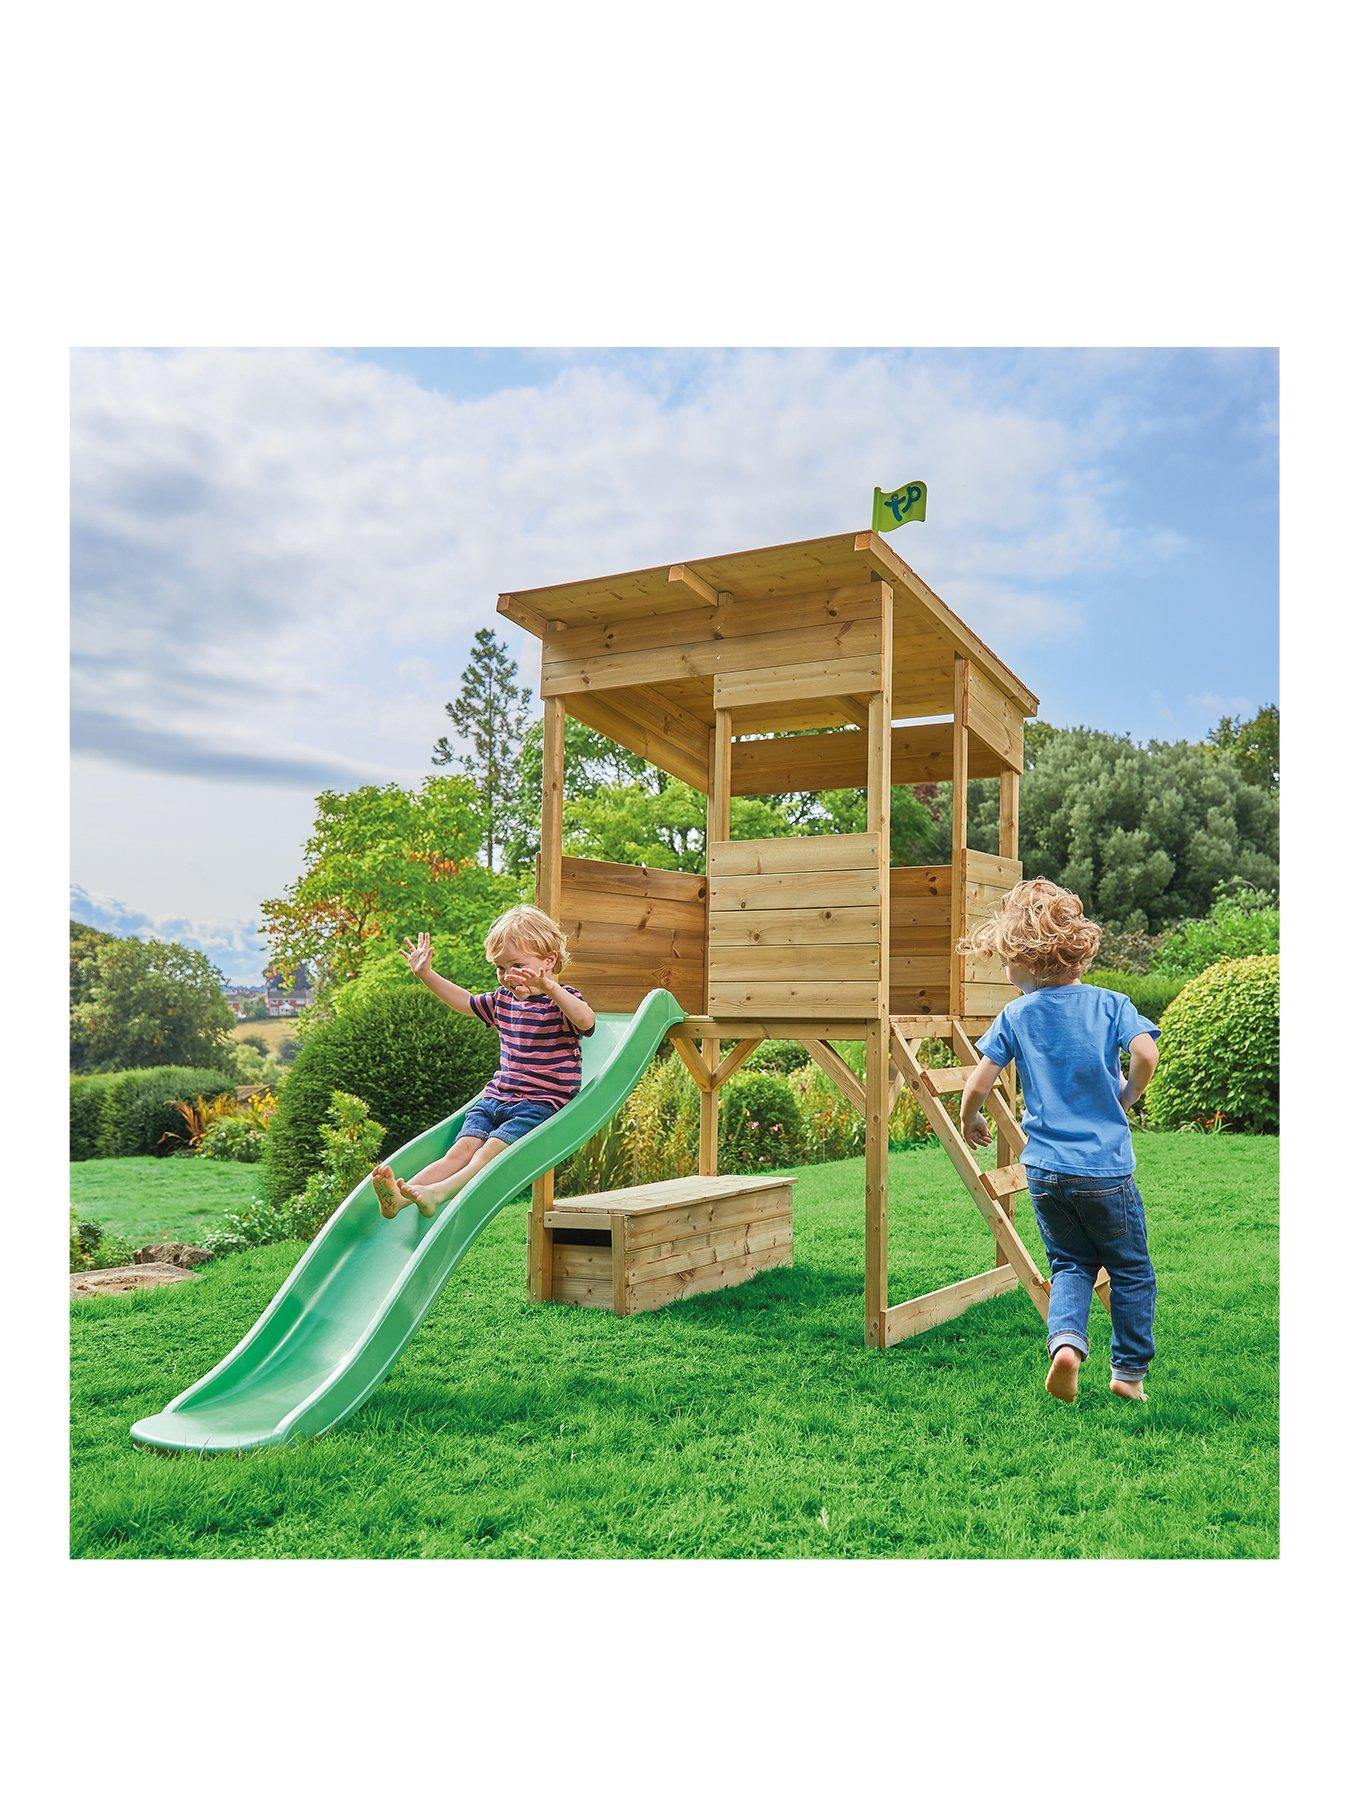 outdoor playhouse with slide